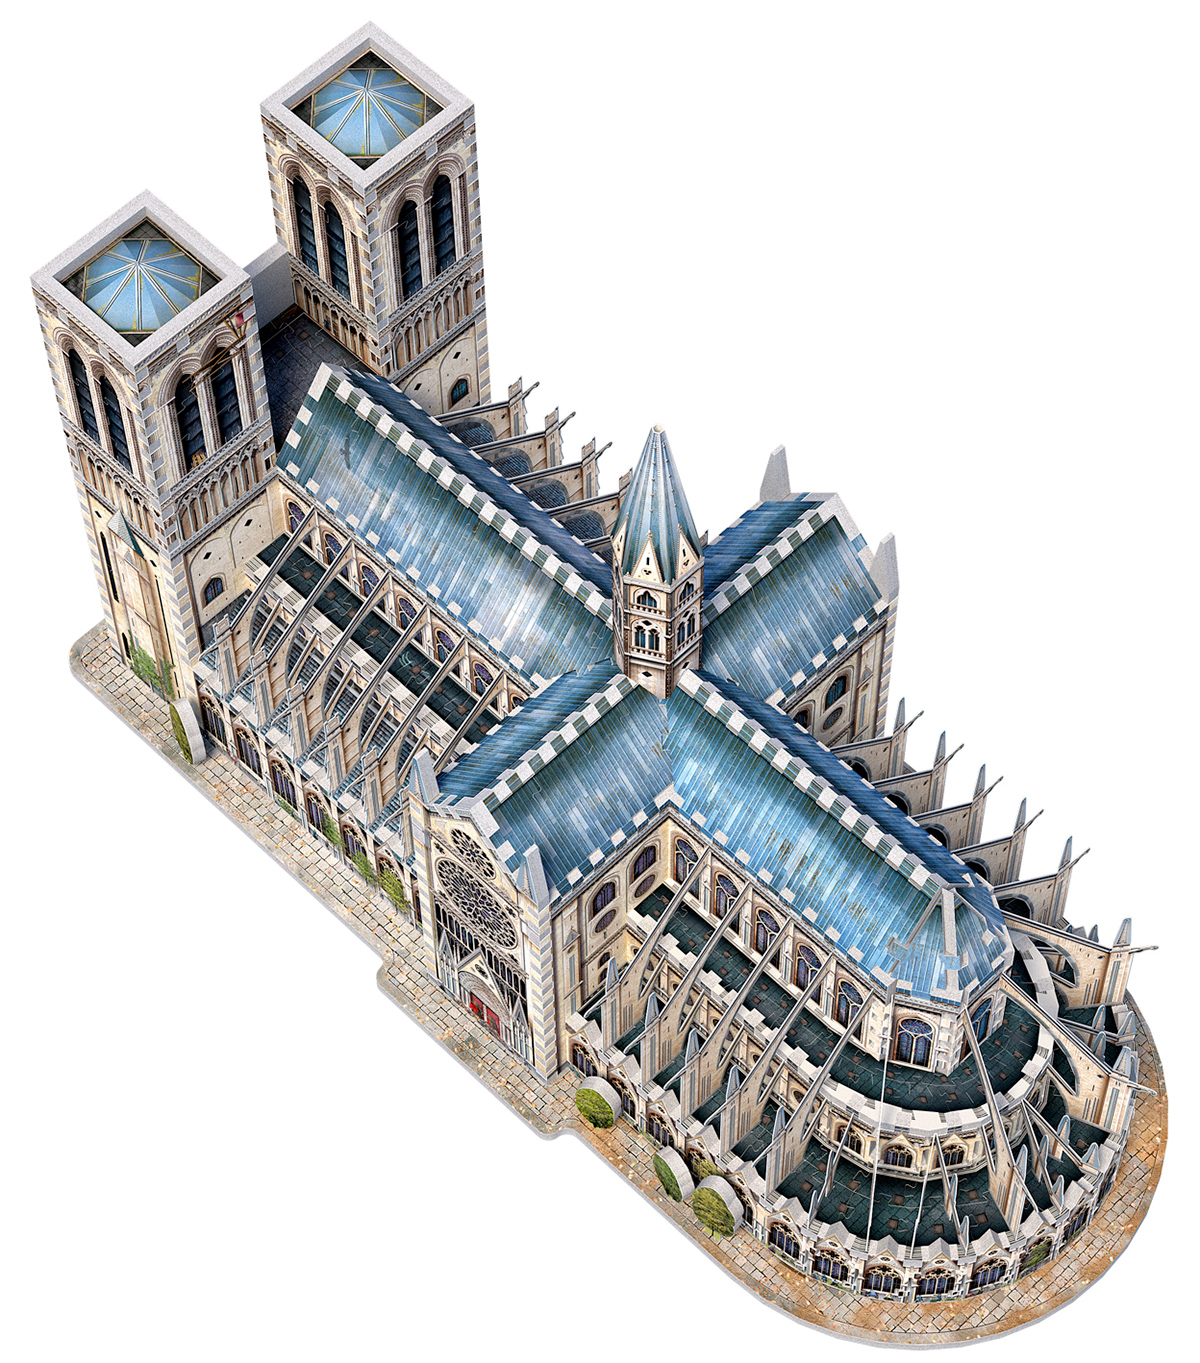 Notre Dame Cathedral Assassin's Creed Unity Wrebbit 3D Puzzle